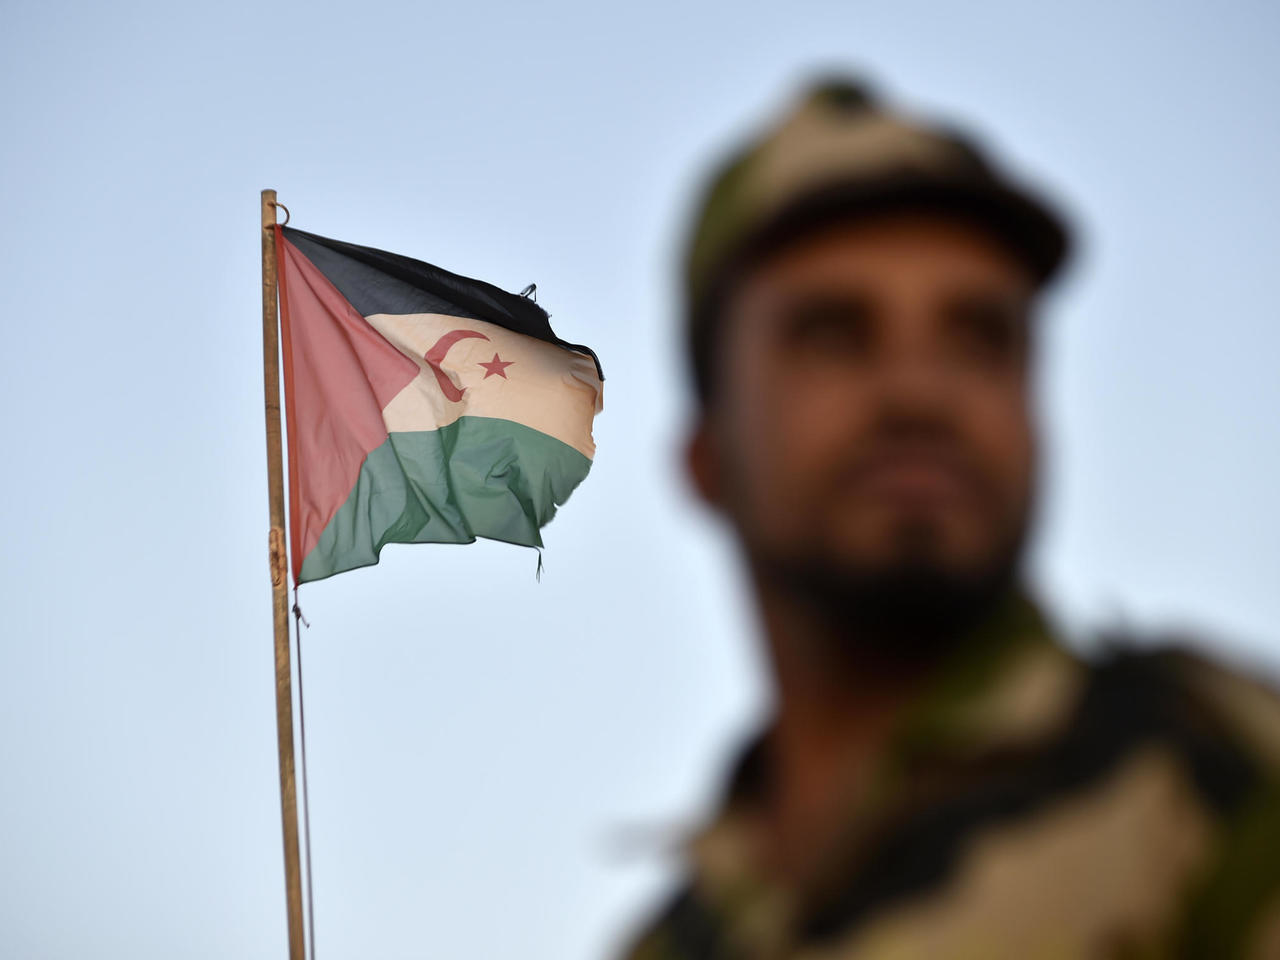 A Polisario Front soldier stands before a Sahrawi flag in Western Algeria